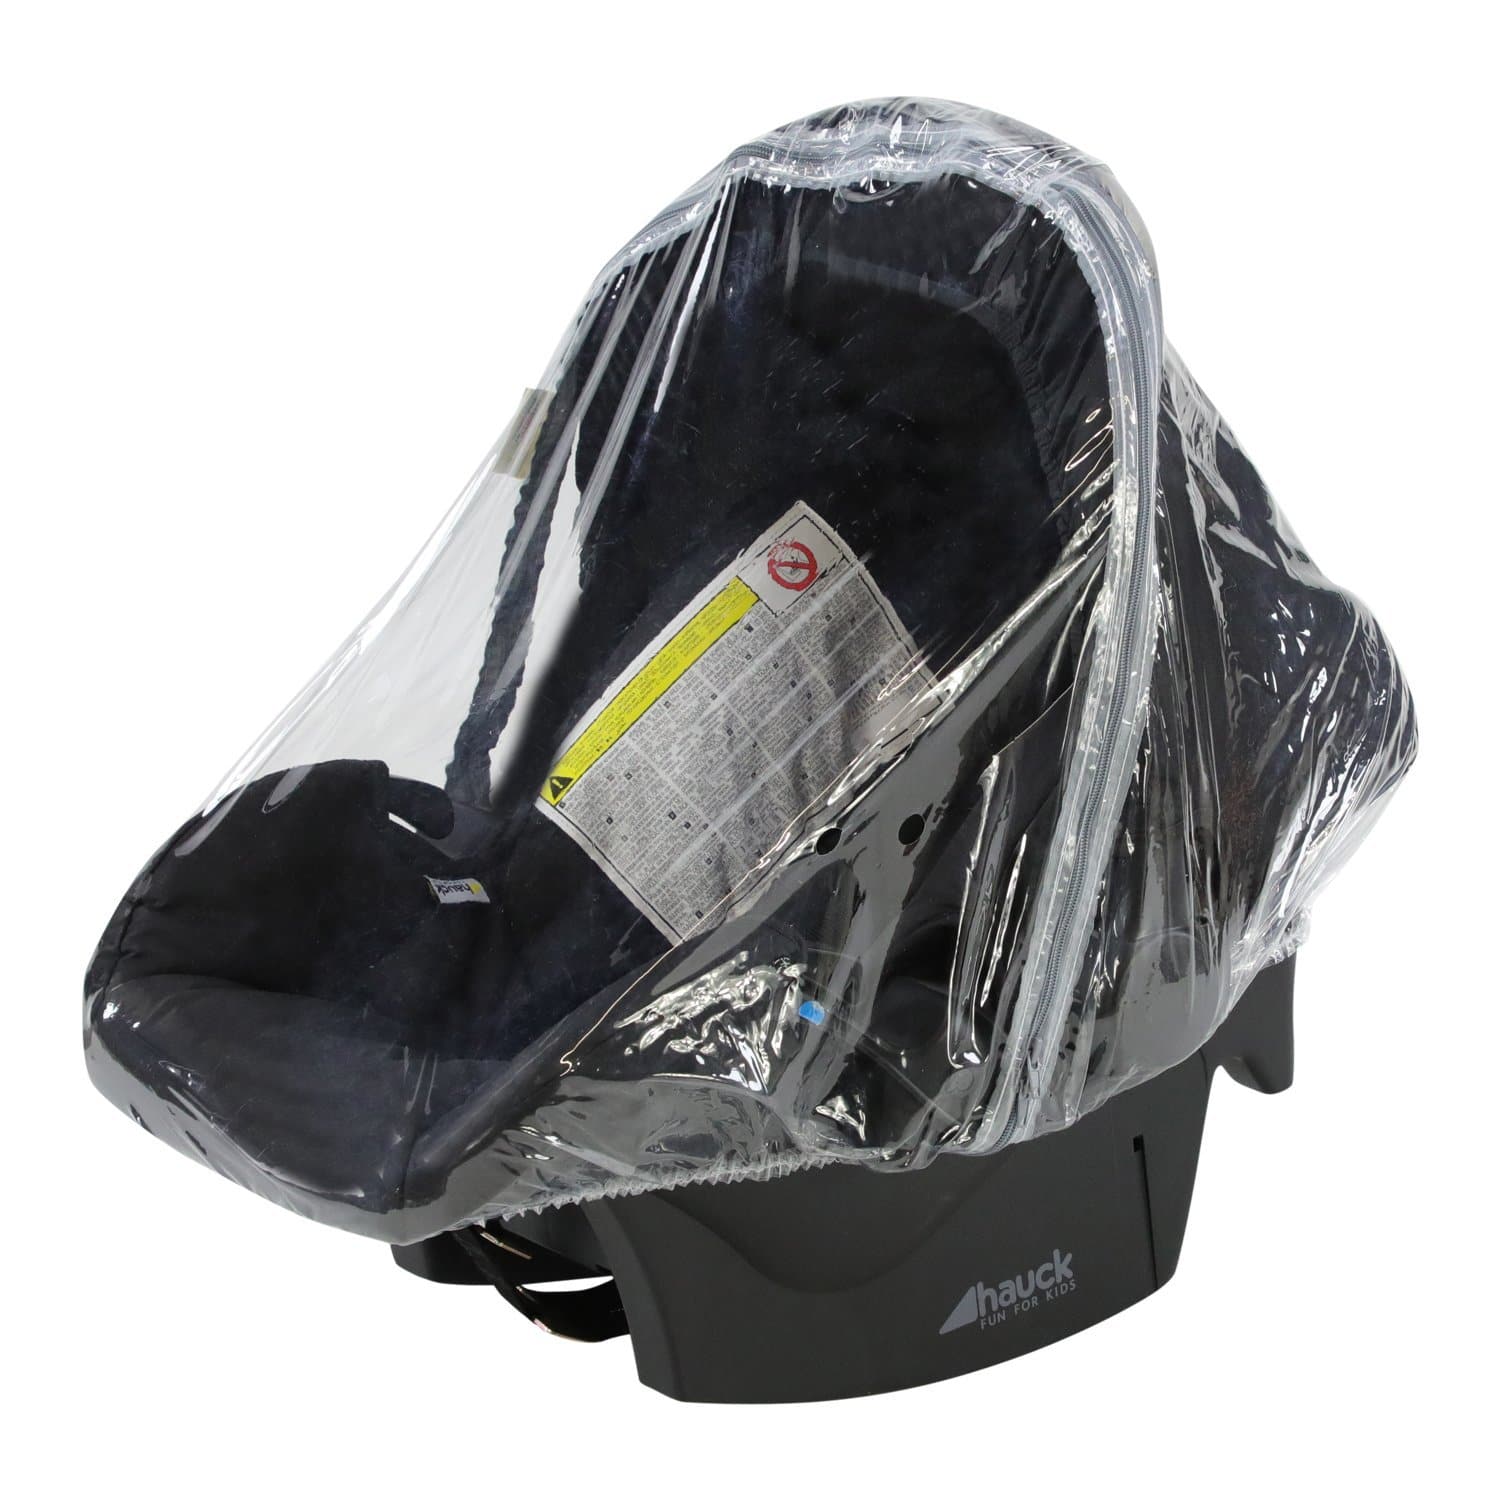 Car Seat Raincover Compatible with Mee-Go - For Your Little One